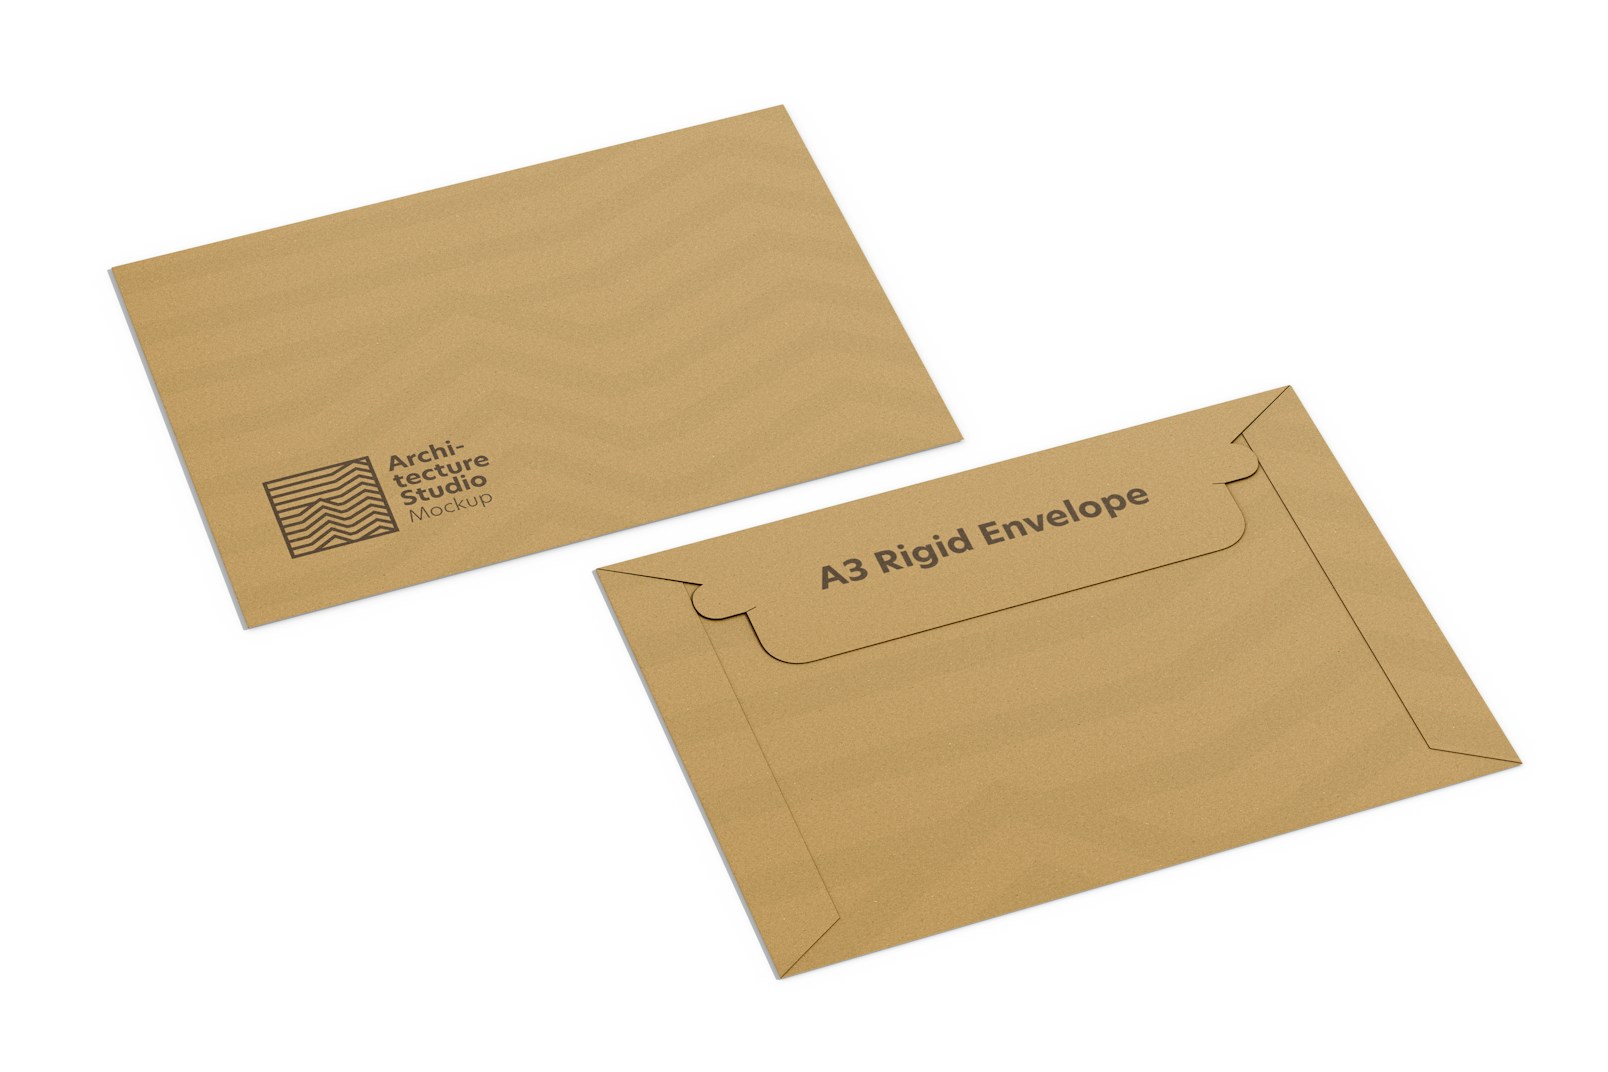 A3 Rigid Cardboard Envelope Mockup, Front and Back View